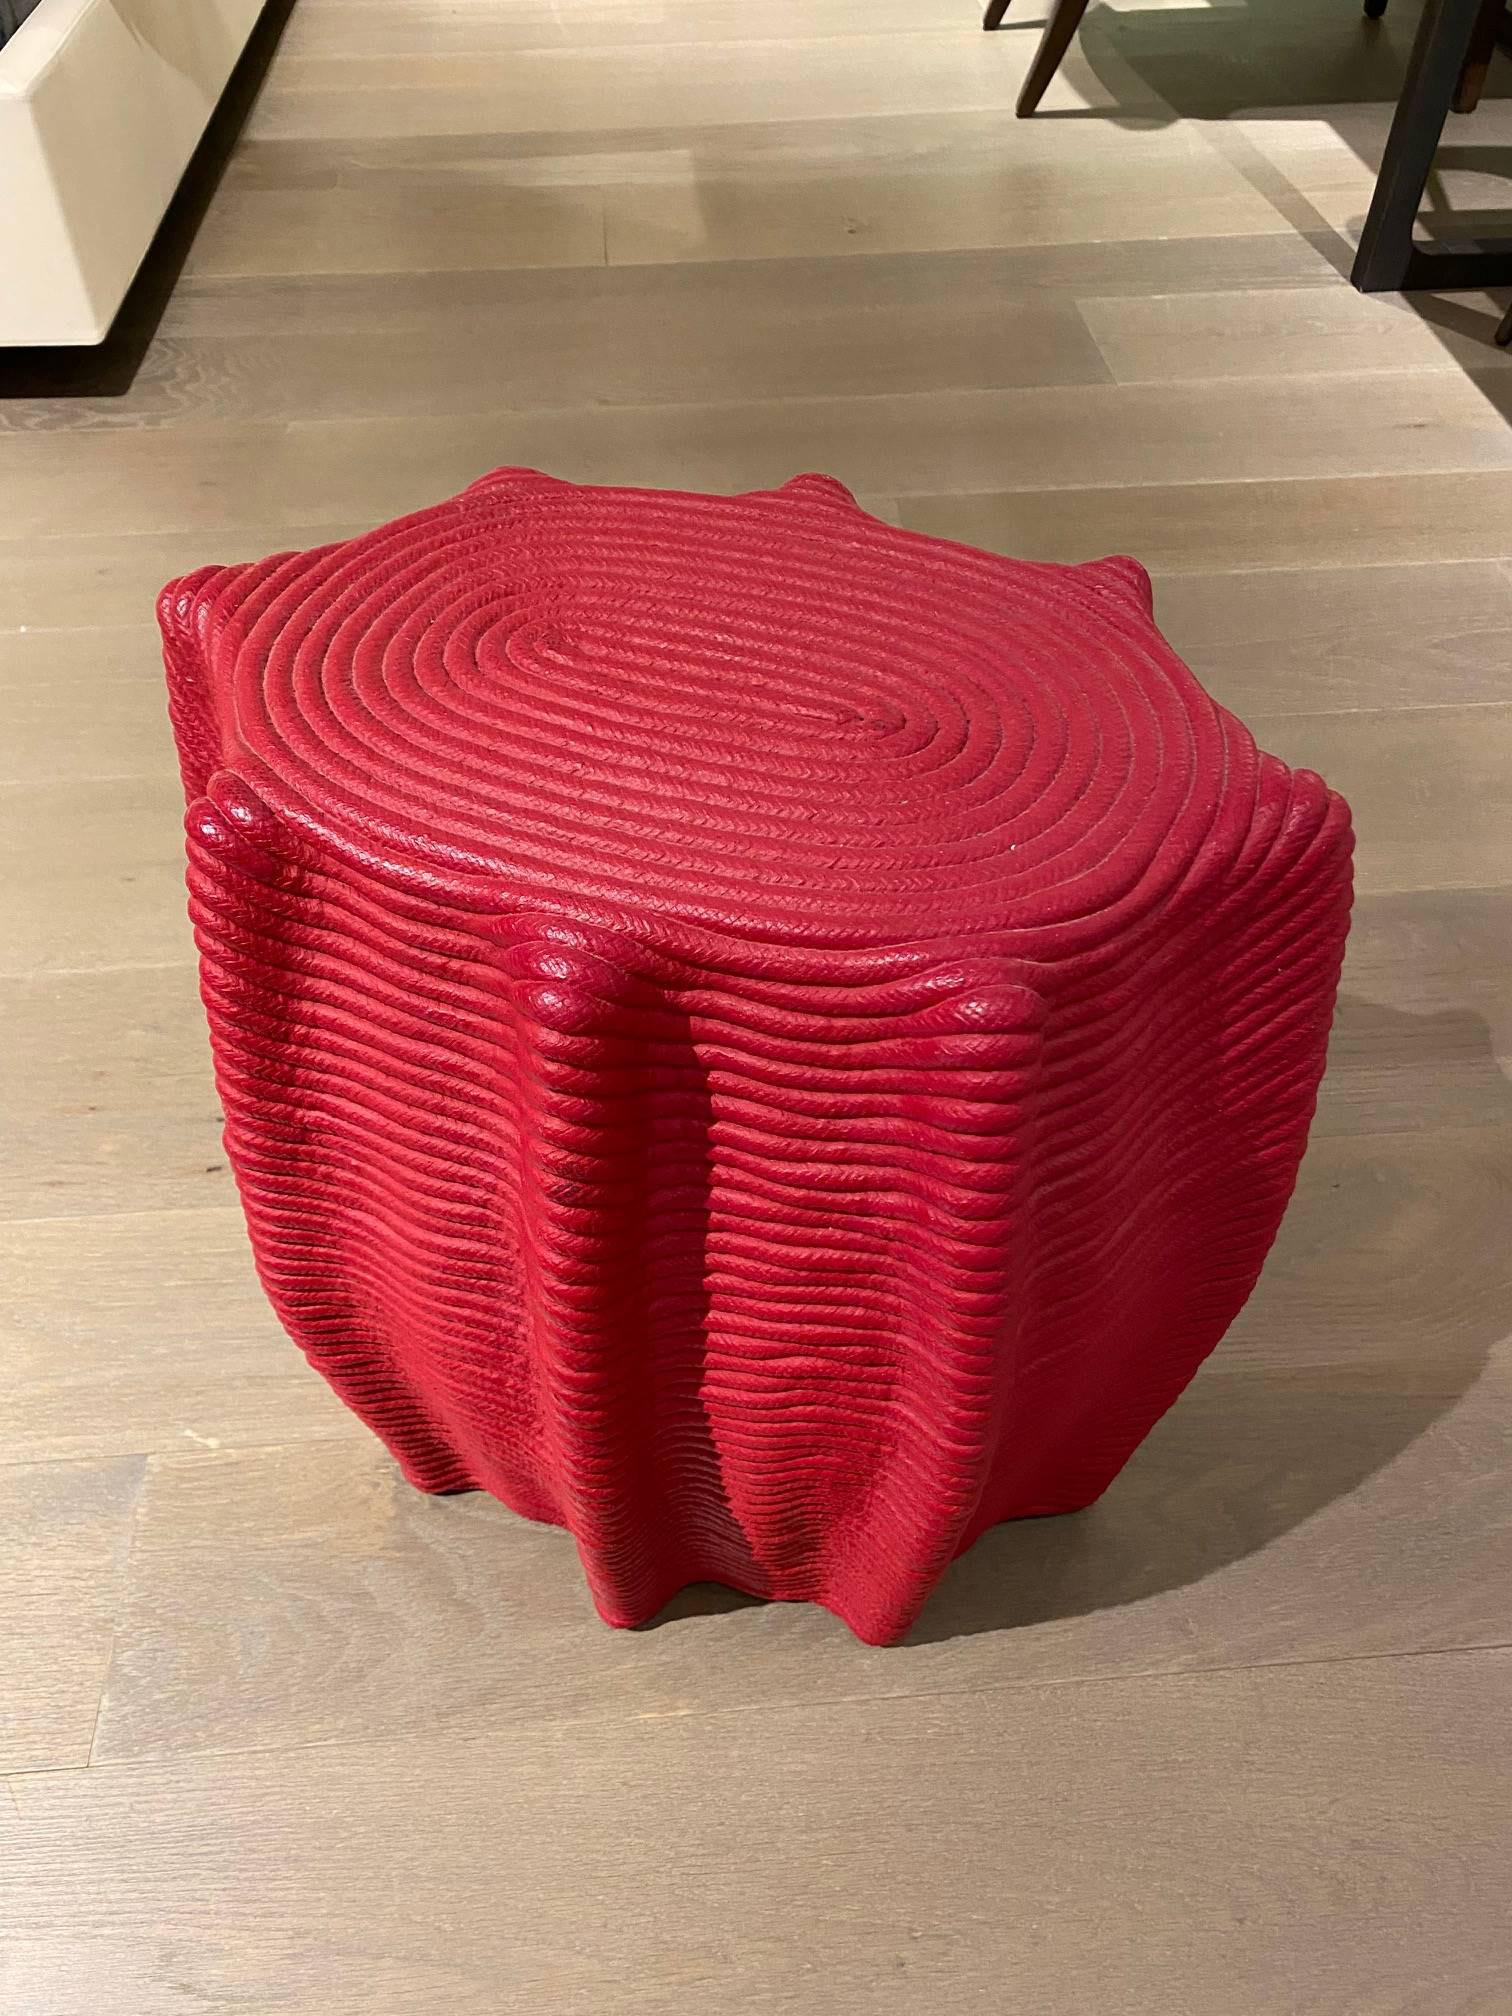 Contemporary HOLLY HUNT Mivalo Stool in Carmin Red Cotton Cord by Christian Astuguevieille